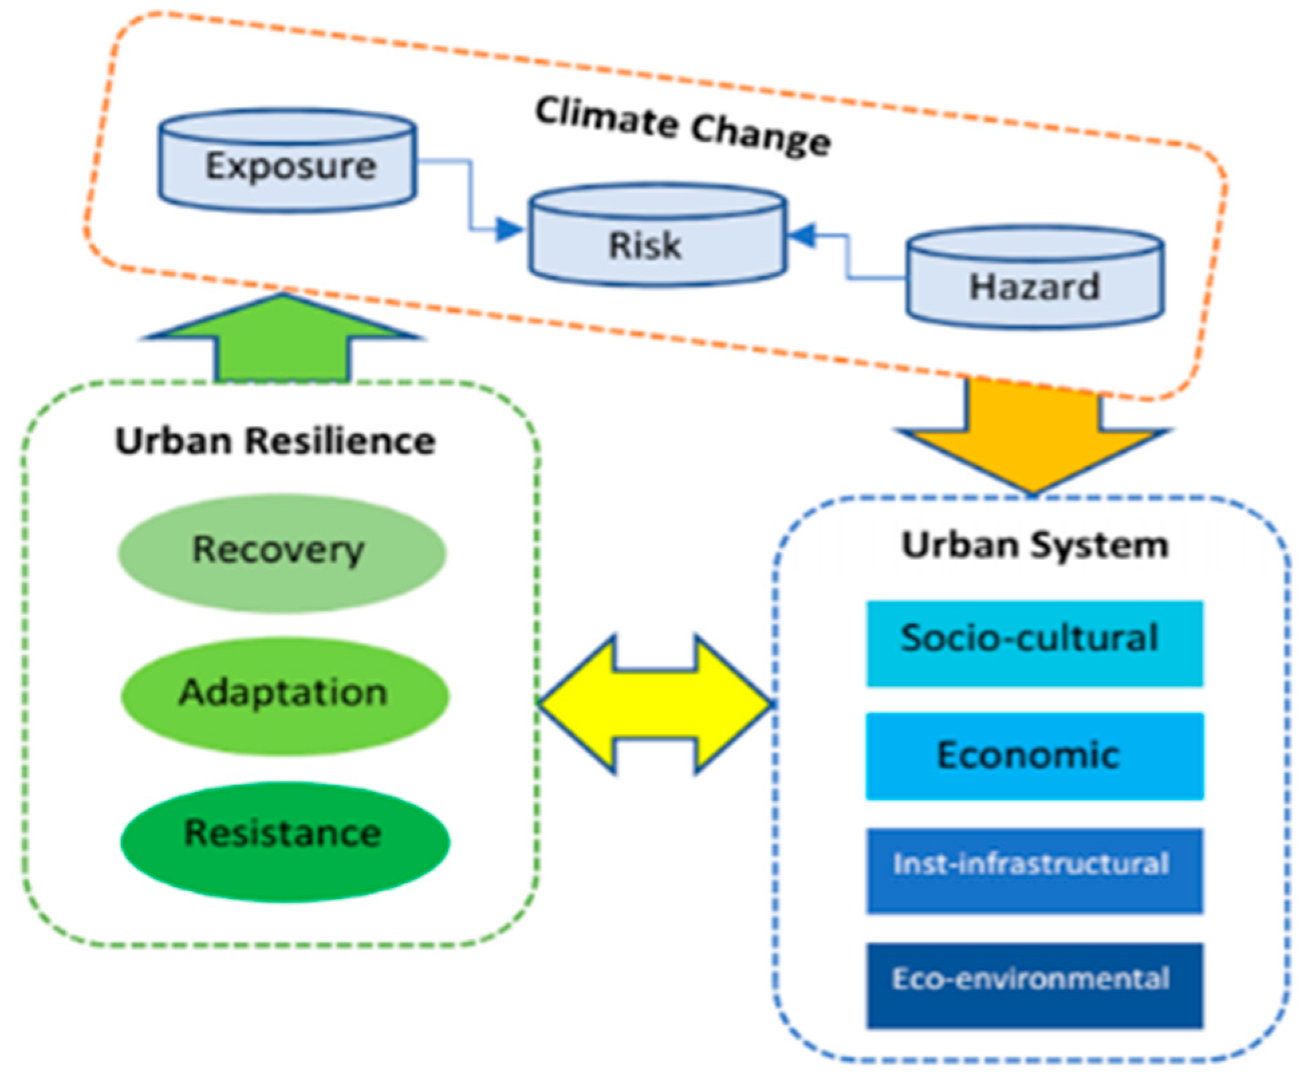 Risks, adaptation and resilience on coasts and in cities